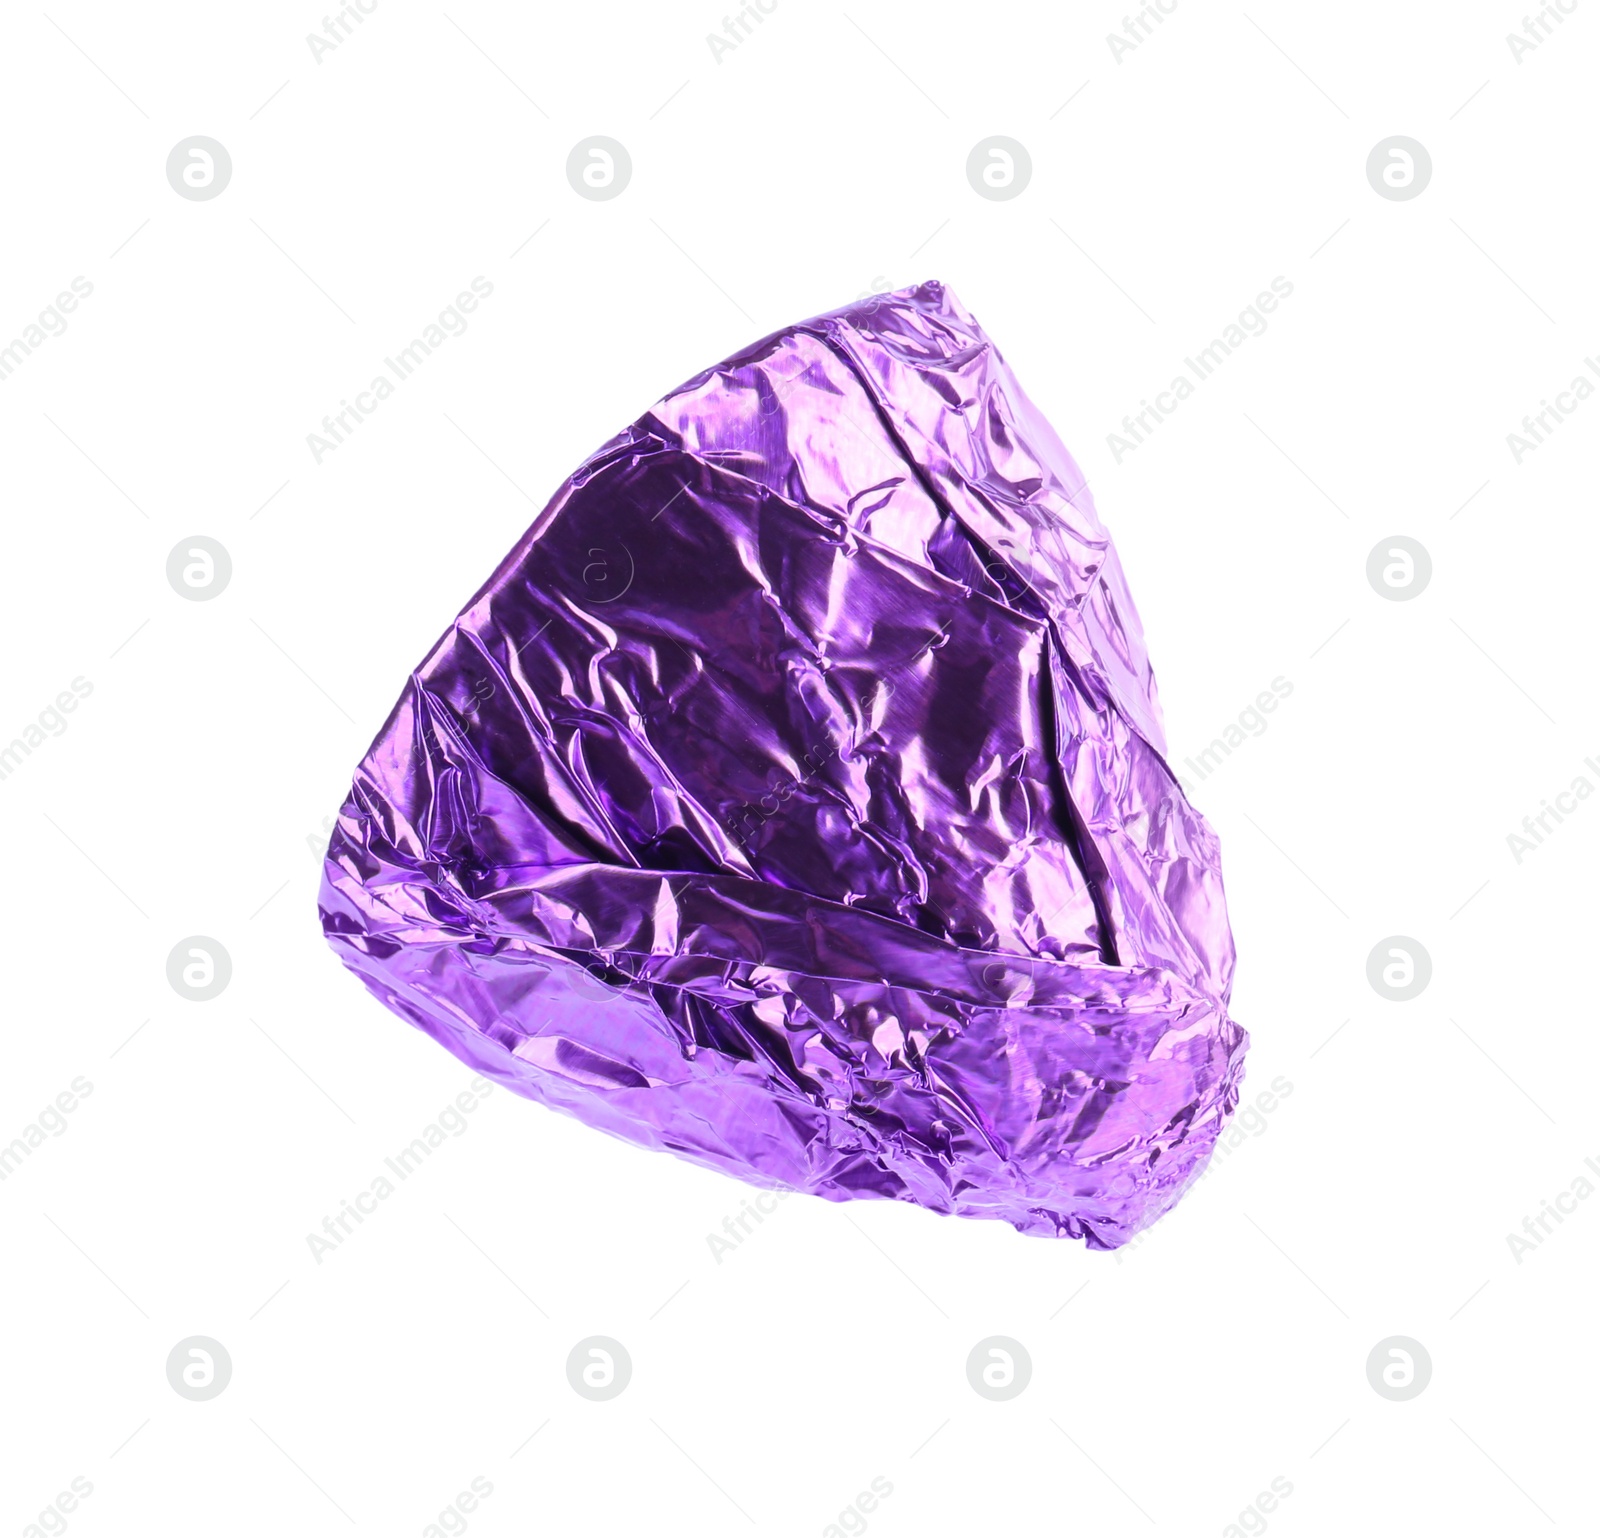 Photo of Tasty candy in purple wrapper isolated on white